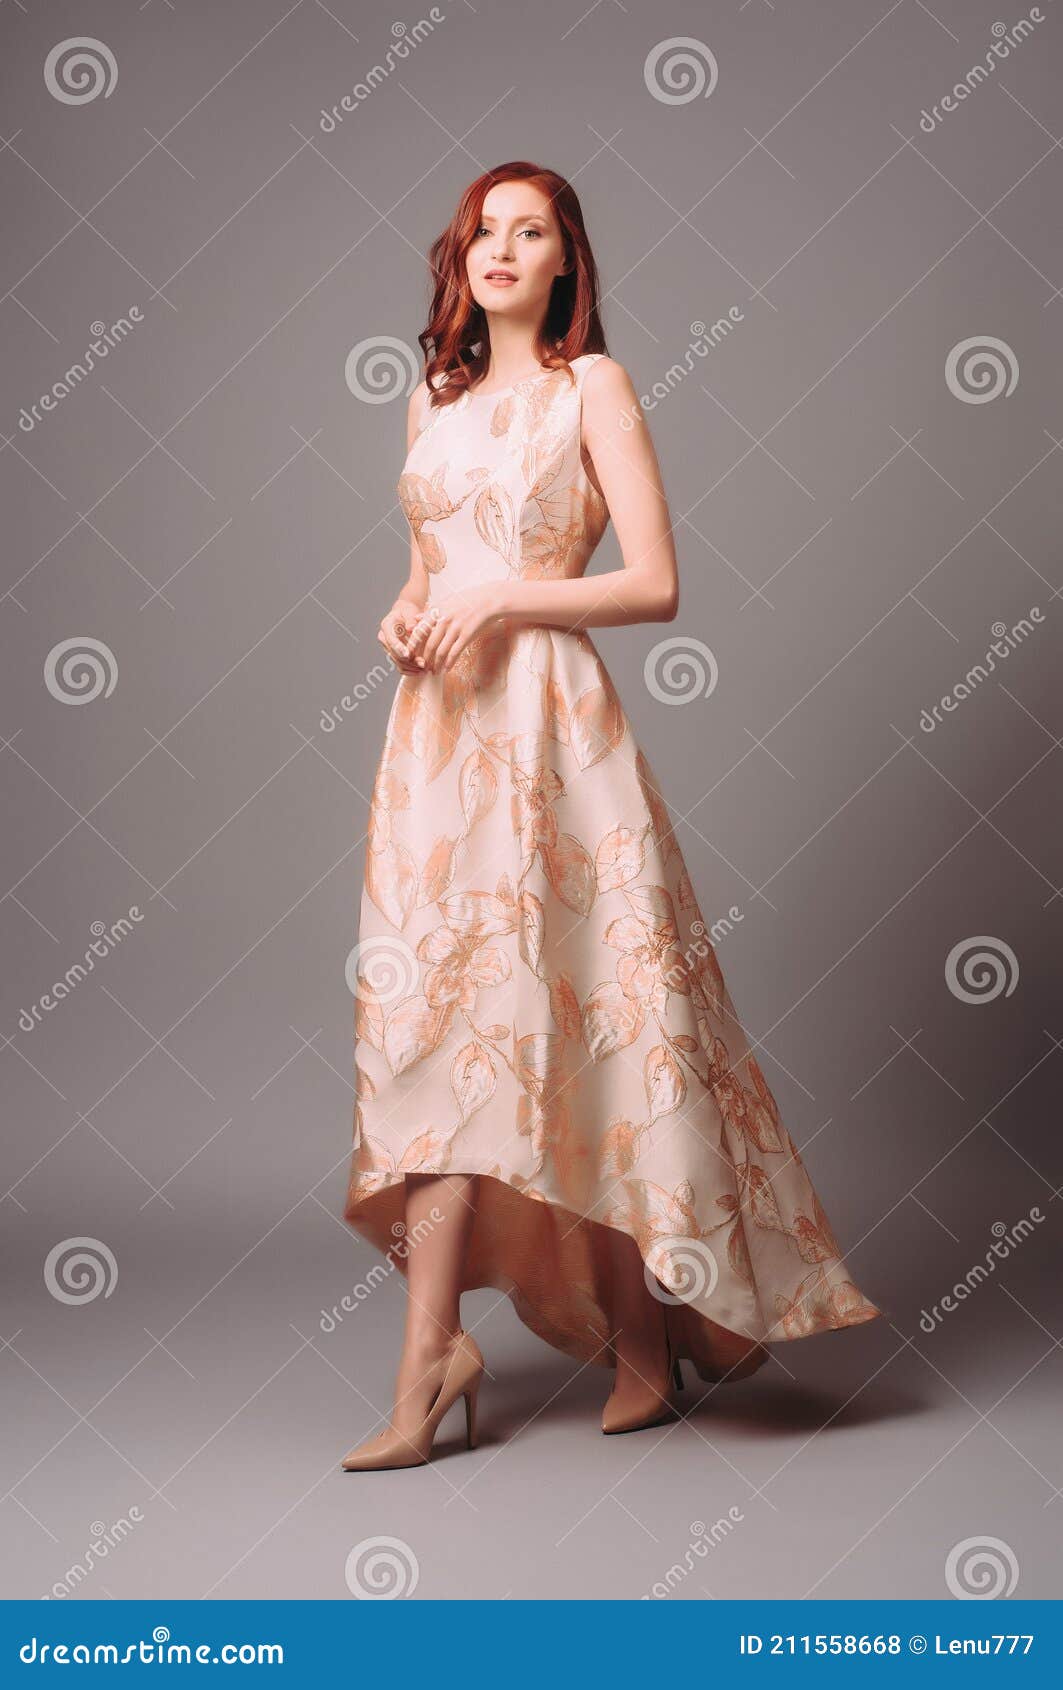 Beautiful Young Woman in White Evening Dress with Floral Print. Studio  Portrait of Ginger Girl in Evening Gown Stock Image - Image of event,  background: 209013297